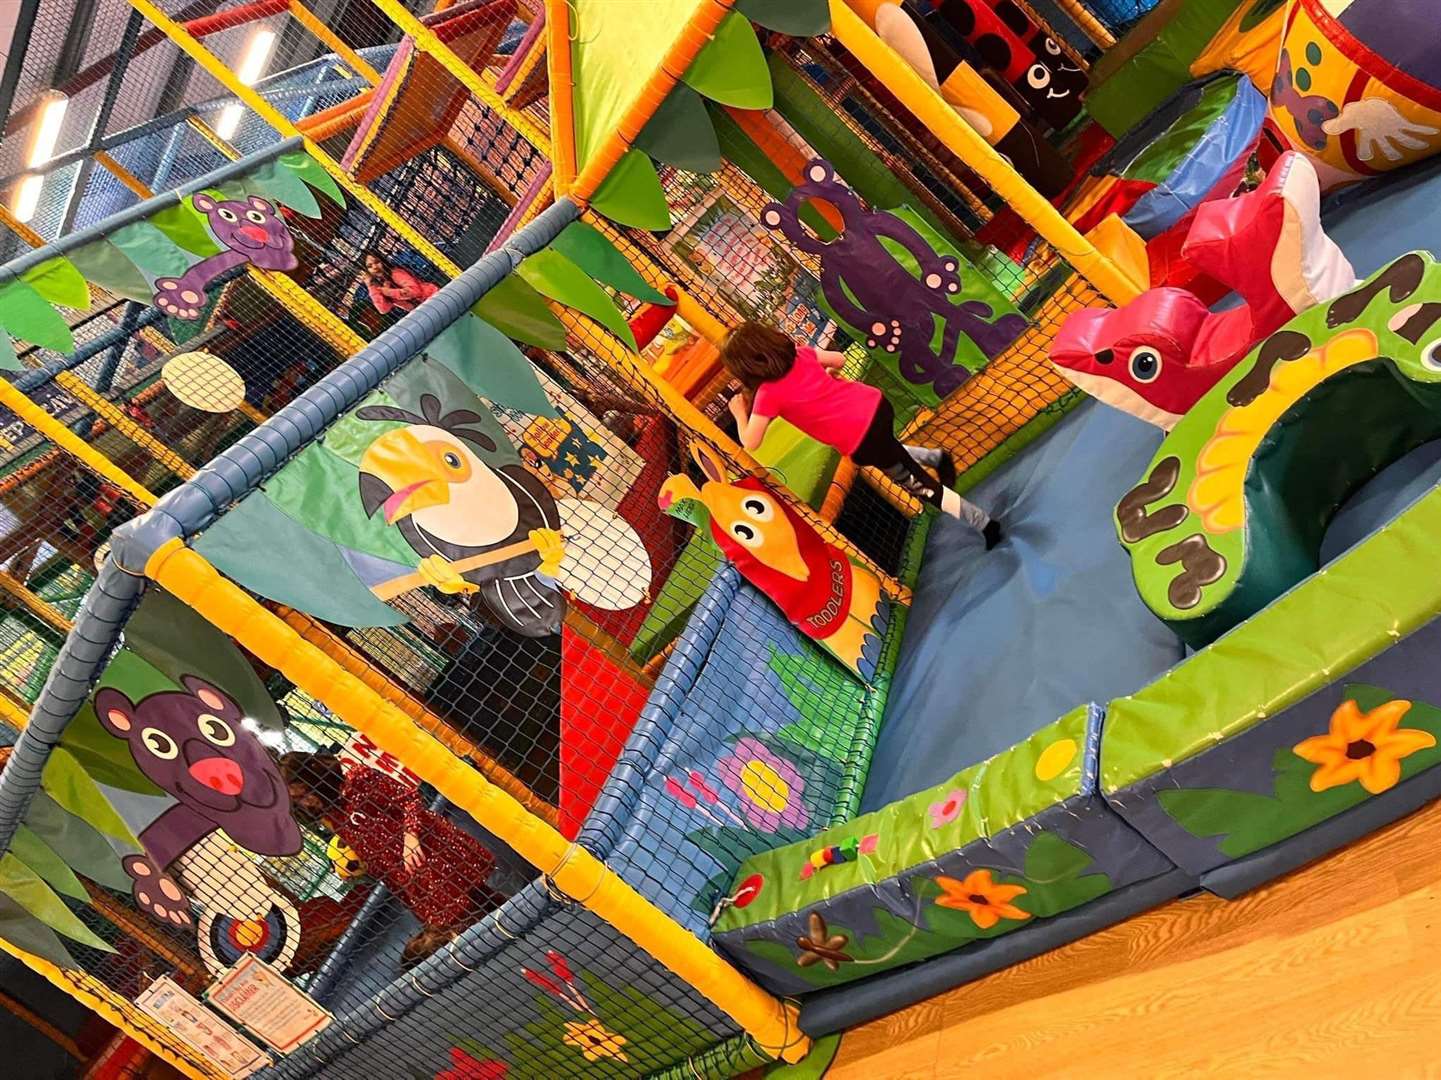 The play area at the Play Zone had become a regular meeting place for families supported by This Is Me Highland.